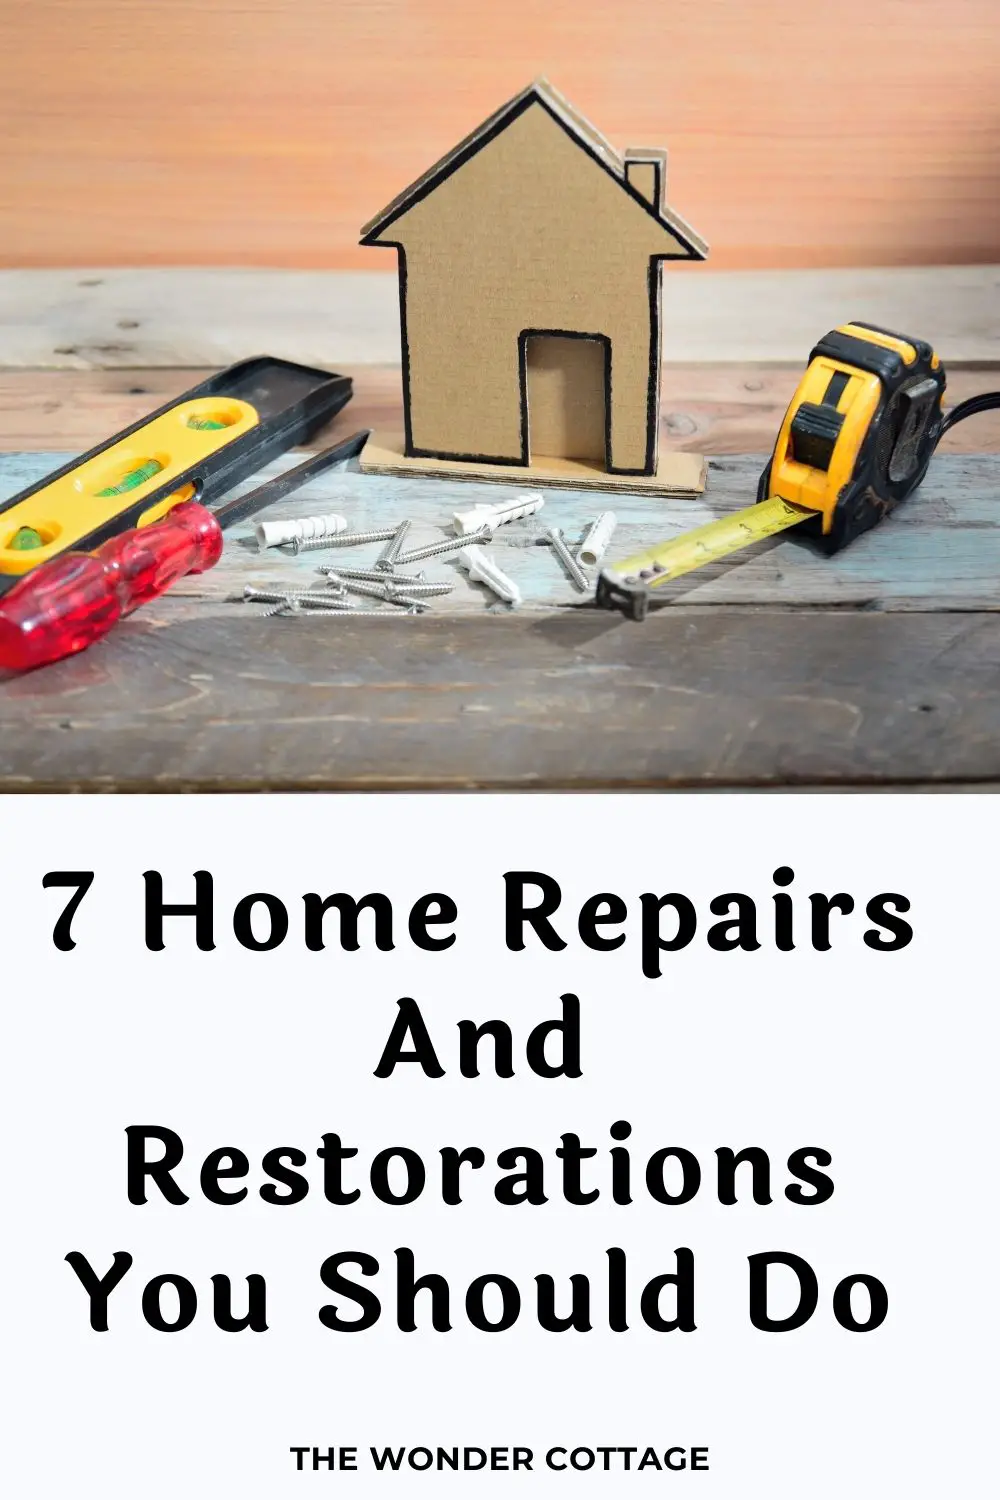 7 home repairs and restorations you should do